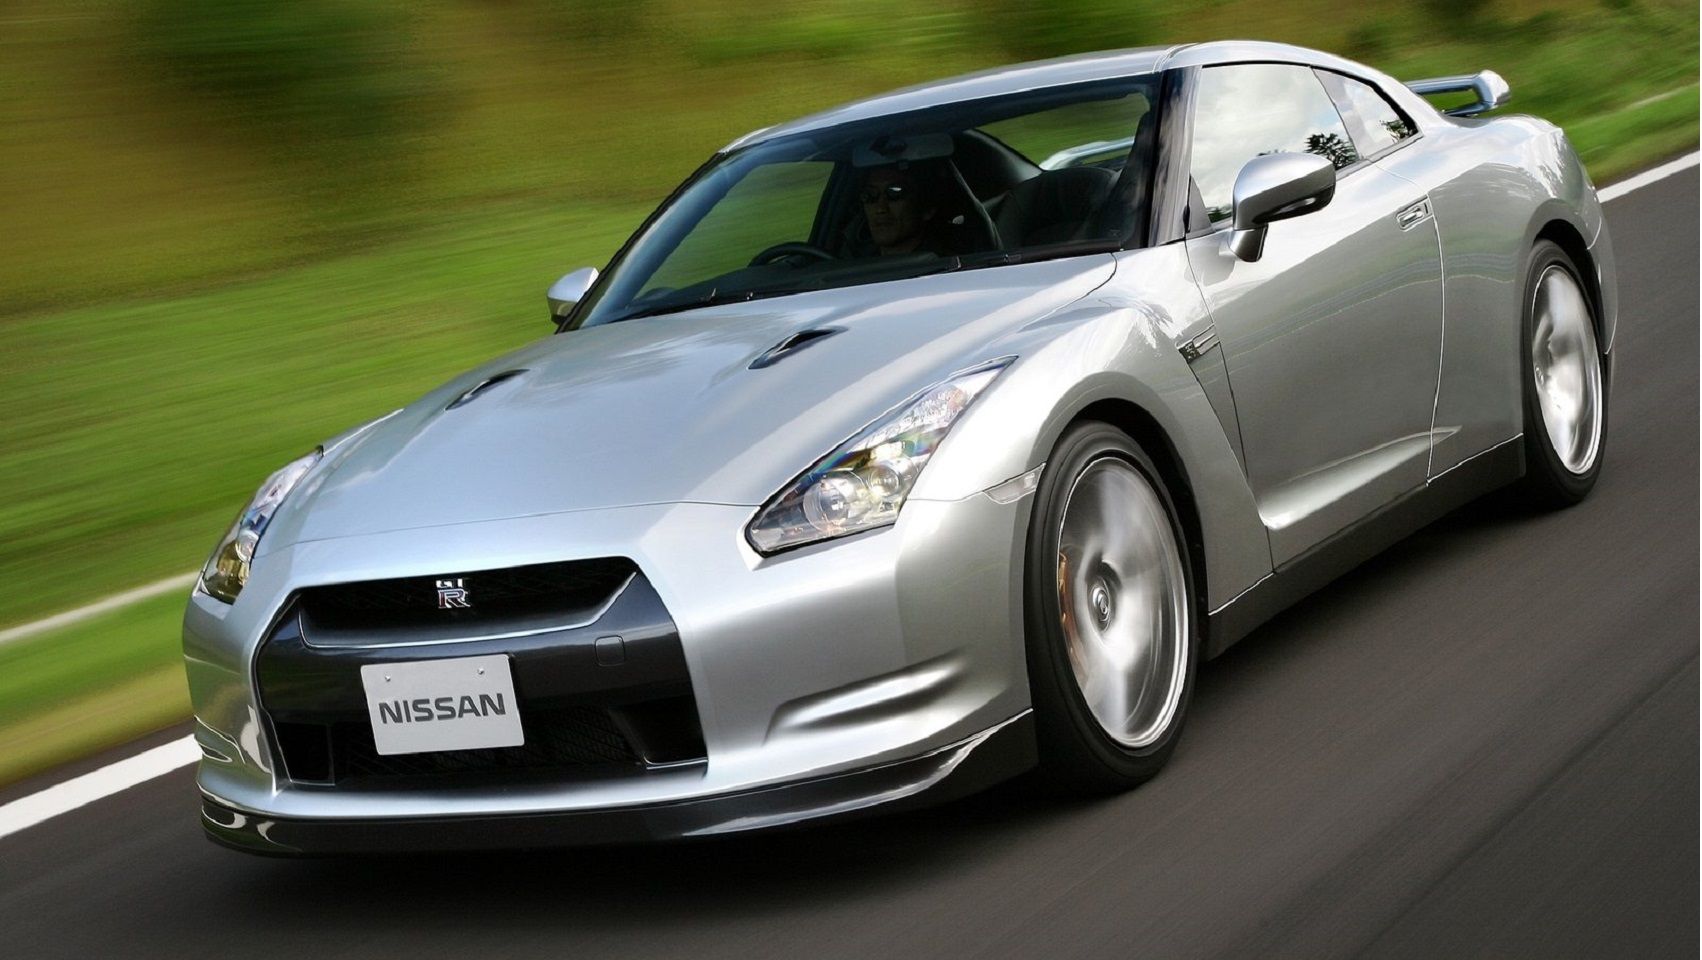 Nissan GT-R - Fornt